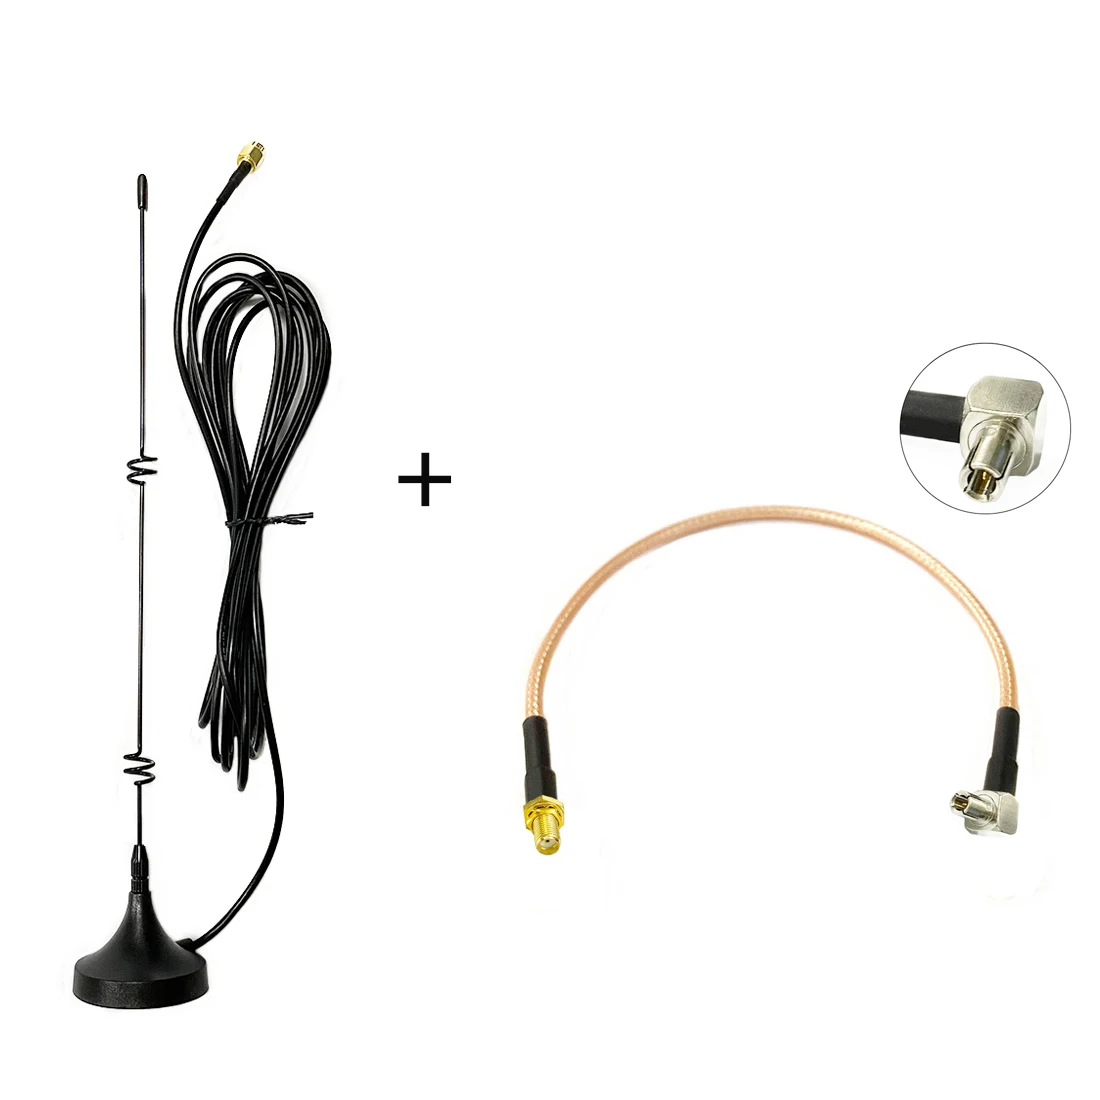 4G 3G GSM Antenna 6dbi High Gain Magnetic Base with 3meters Cable SMA Male +SMA Female Connector  to TS9 Male RG316 Cable 15cm 3g antenna 3dbi 900 1800mhz 3g gsm aerial antennas 3meters sma male connector sma female switch crc9 male rf coax adapter